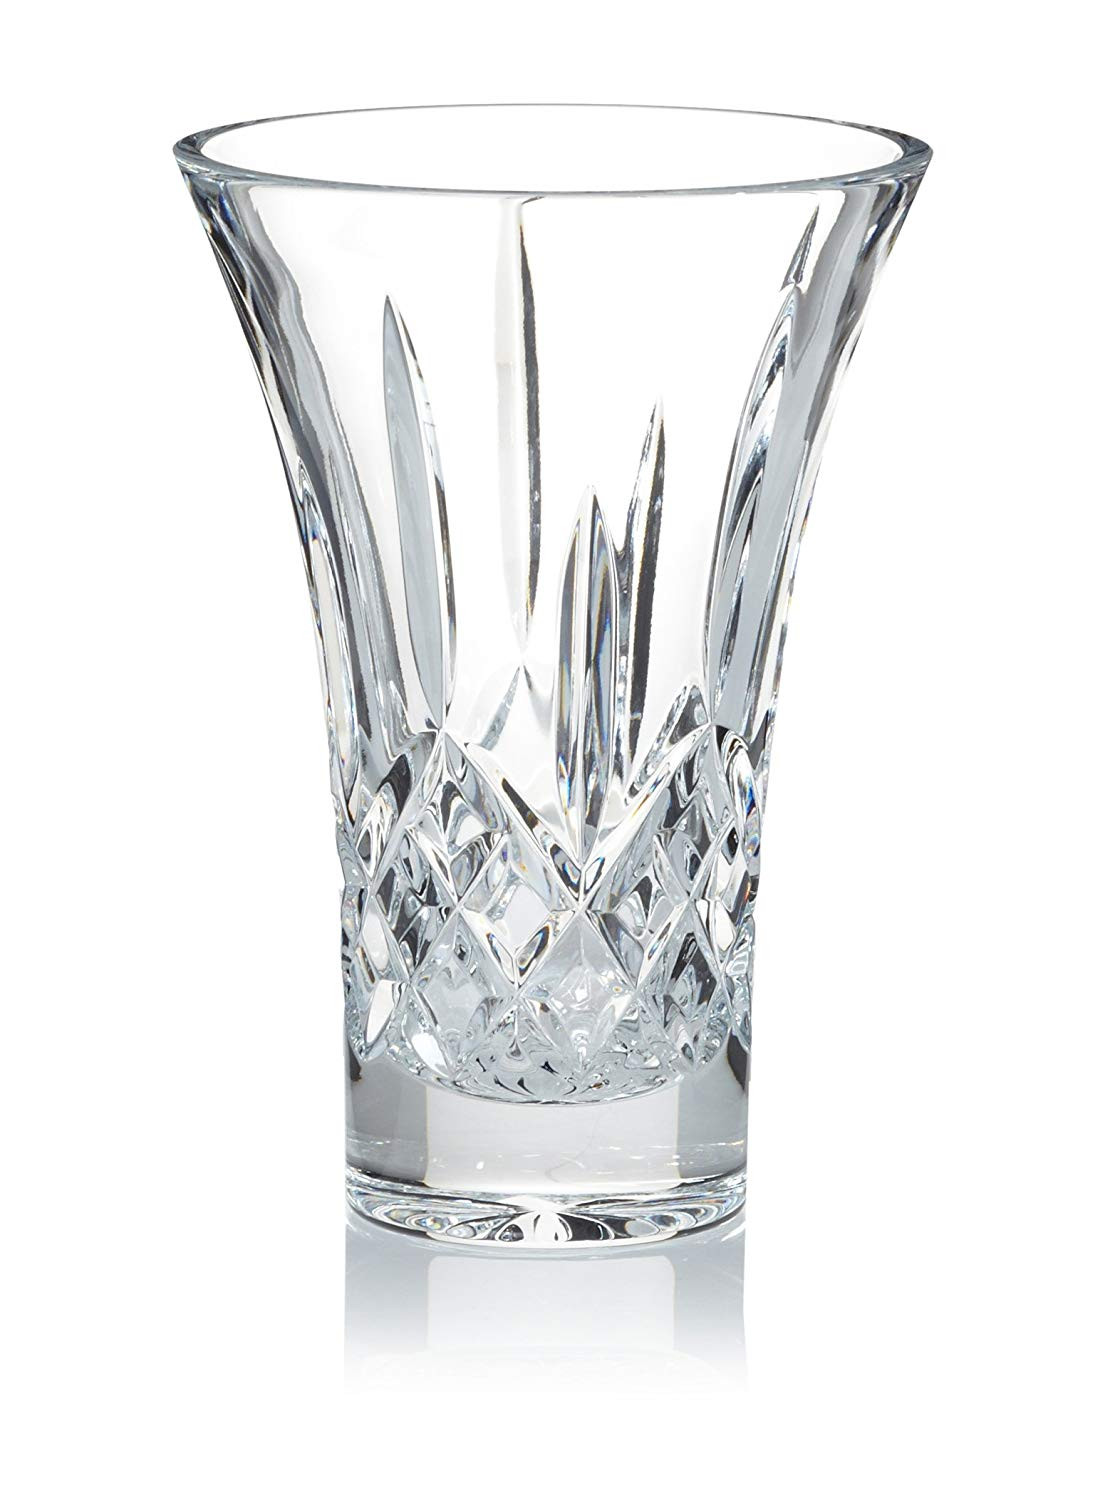 24 Best Libbey Clear Cylinder Bud Vase 2024 free download libbey clear cylinder bud vase of amazon com waterford lismore 8 flared vase home kitchen with regard to 81l9liuahol sl1500